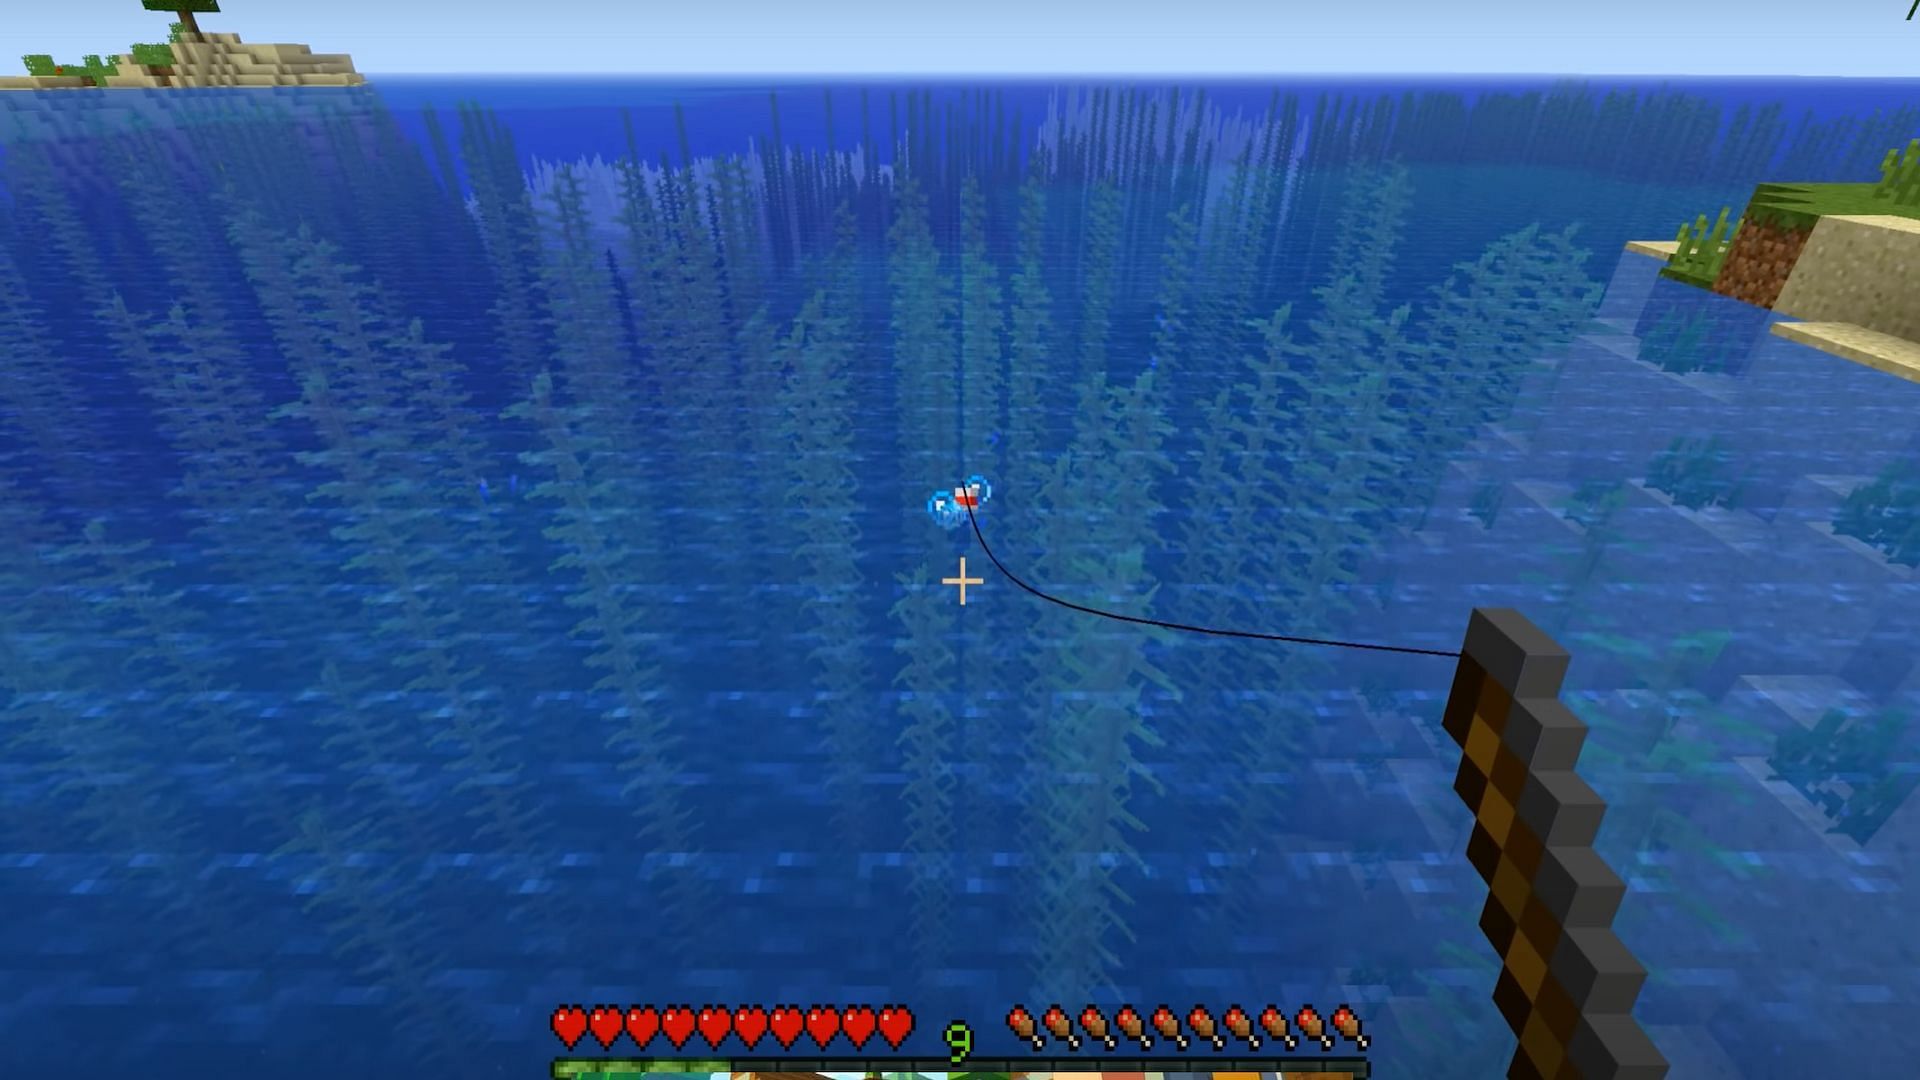 Minecraft players are able to create an automatic fish farm that can help them gather lots of fish and items easily (Image via Cubey/YouTube)